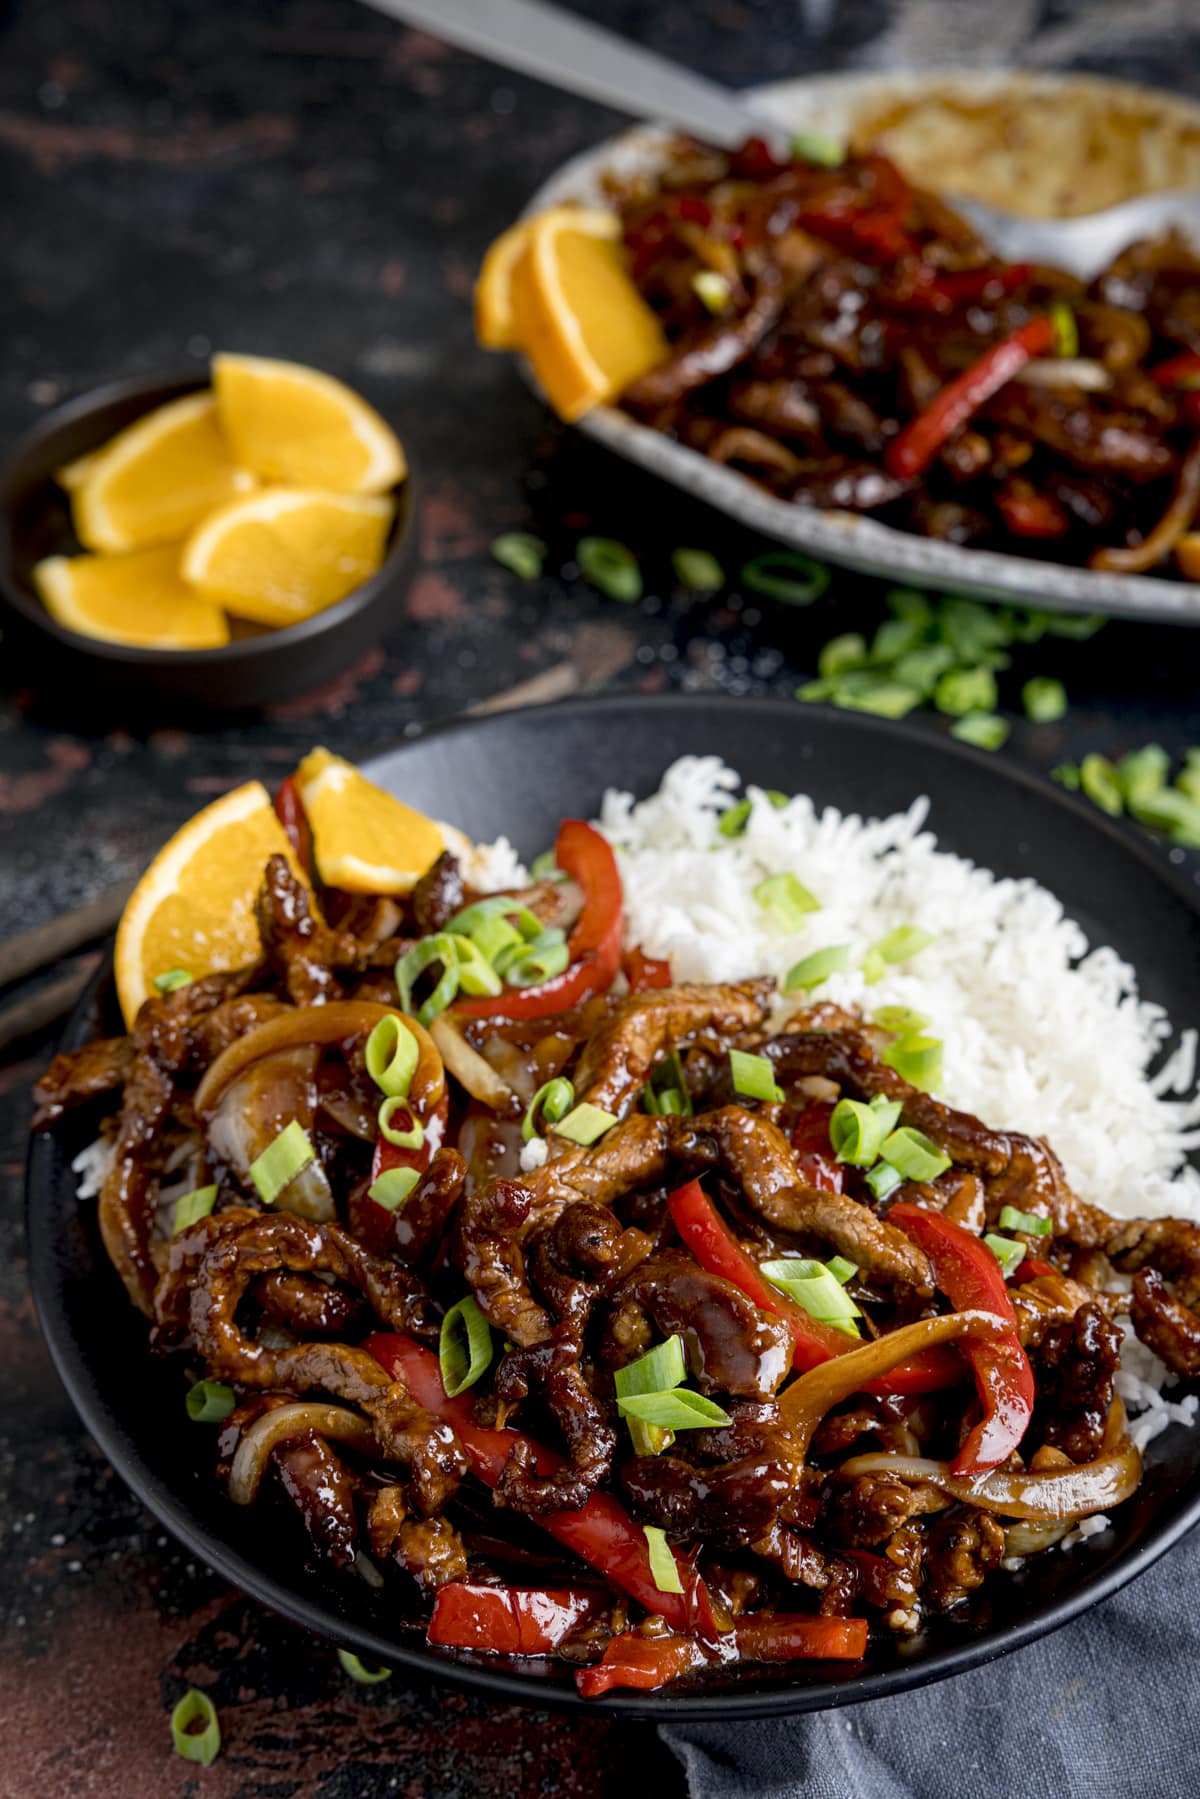 Crispy orange beef with peppers and onions on a dark plate with boiled rice. There are slices of orange and spring onions scattered around and the serving dish is in the background.